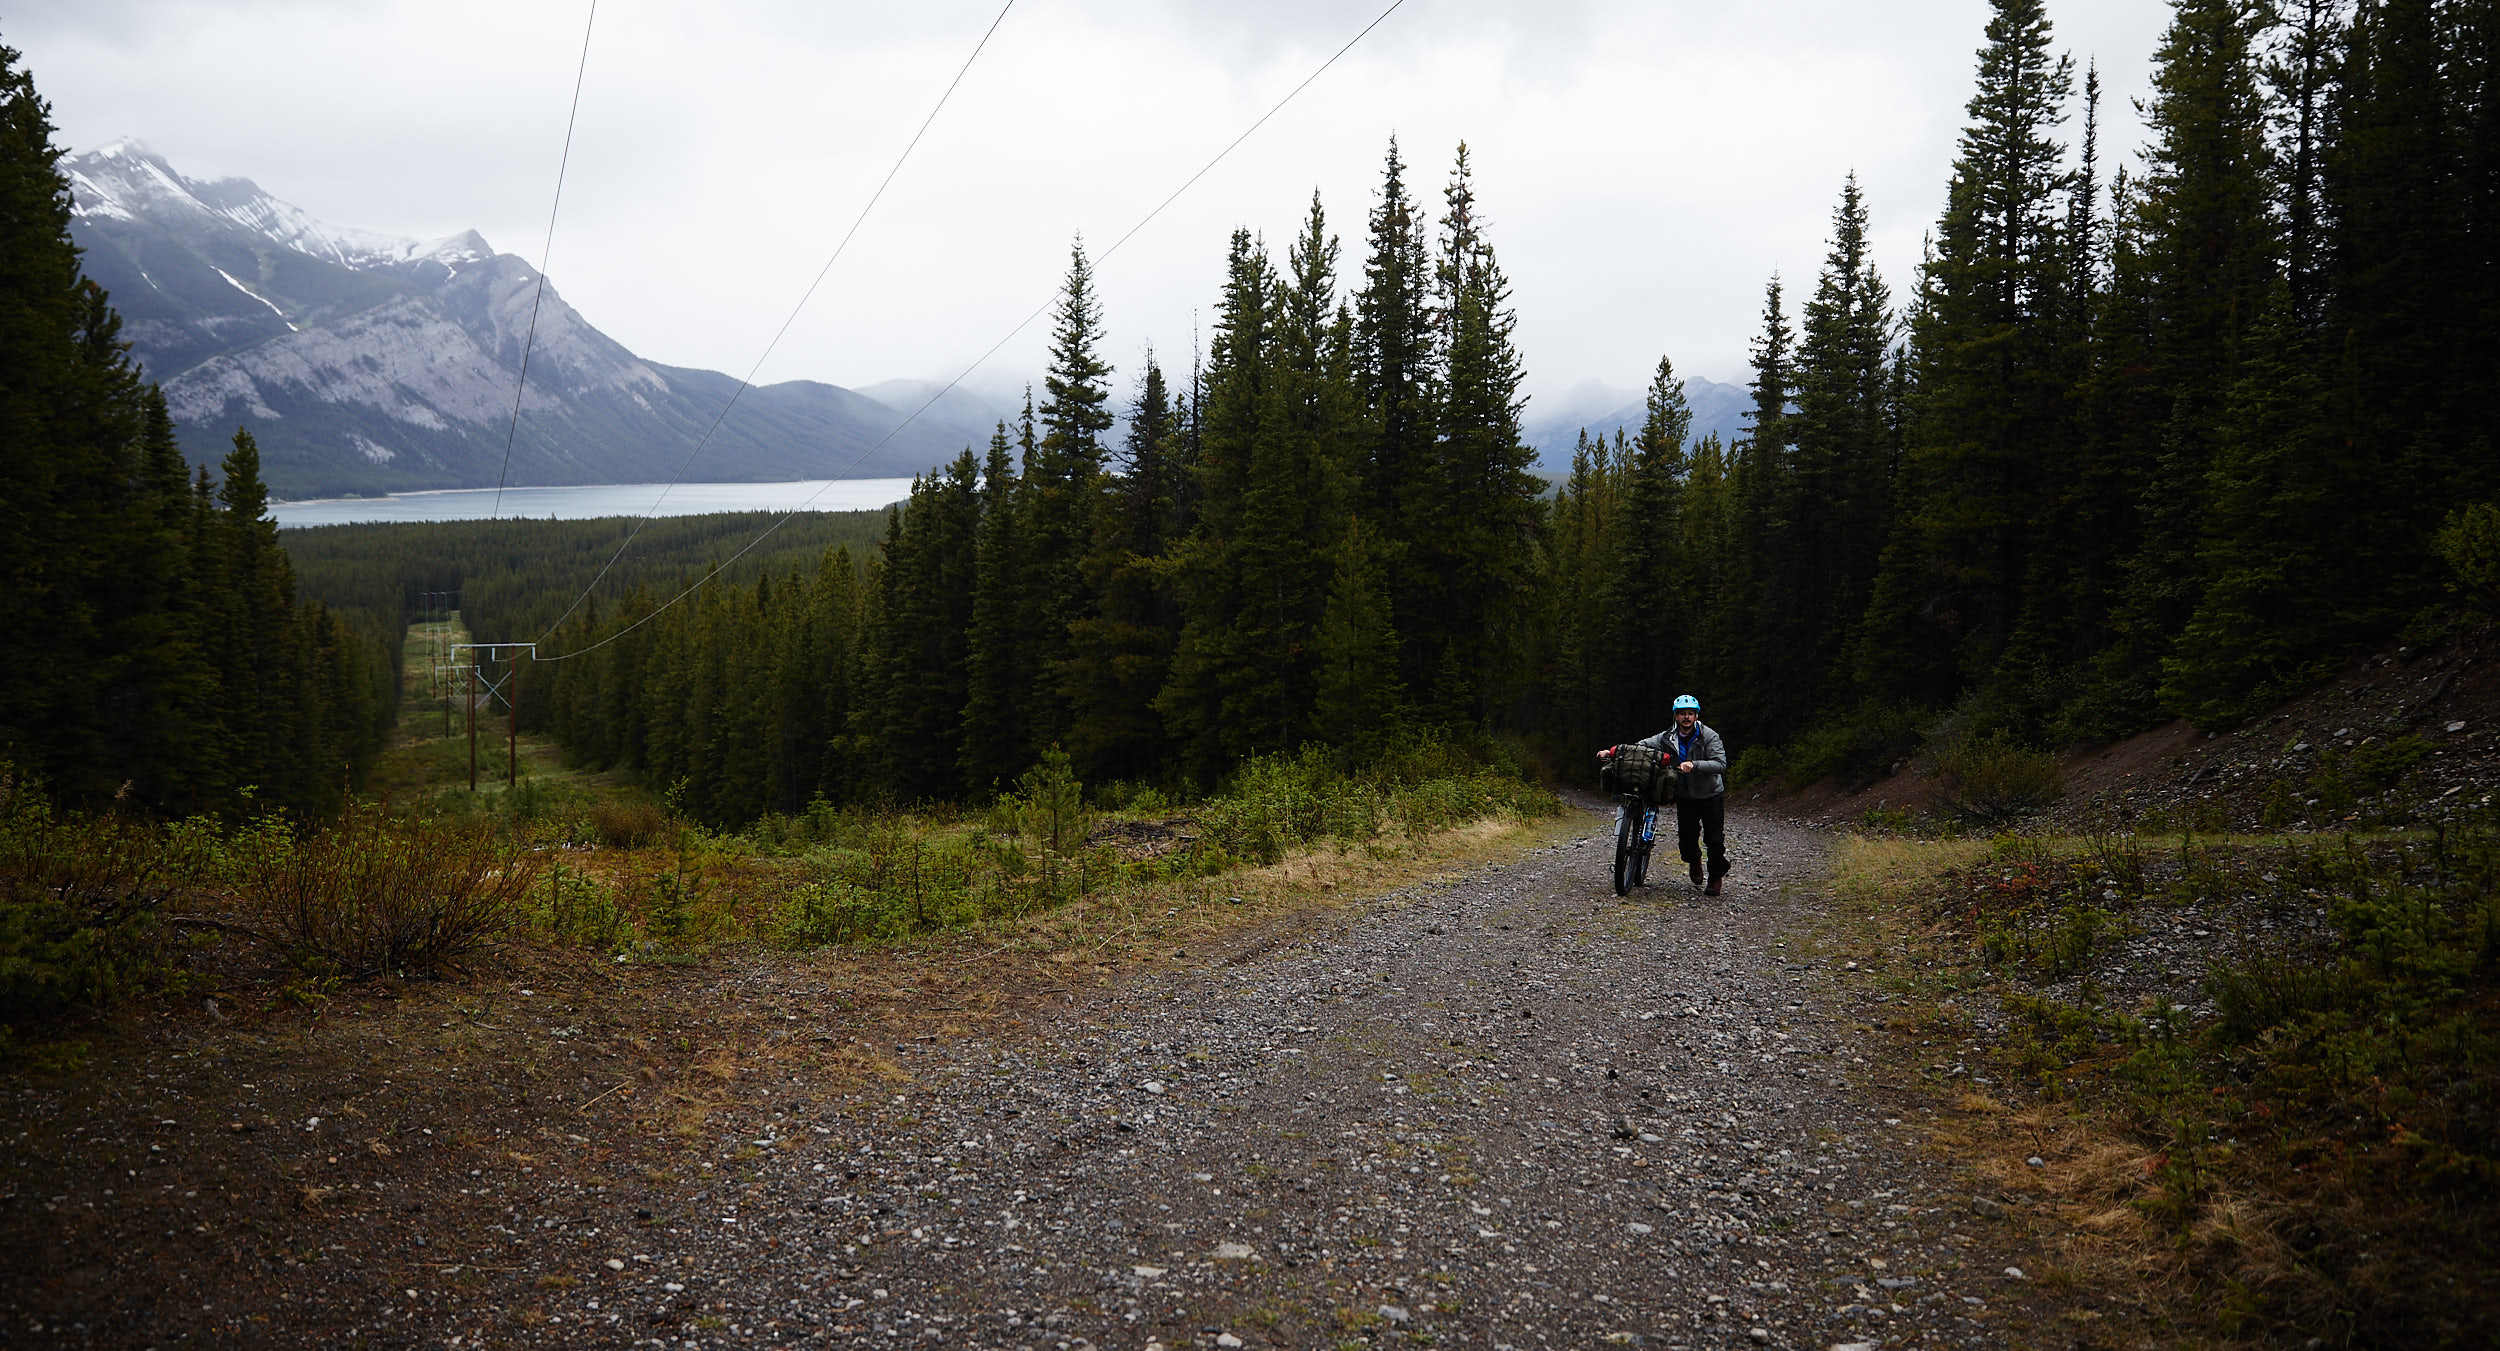  The next morning we started the very steep climb over Elk Pass towards Elkford. 